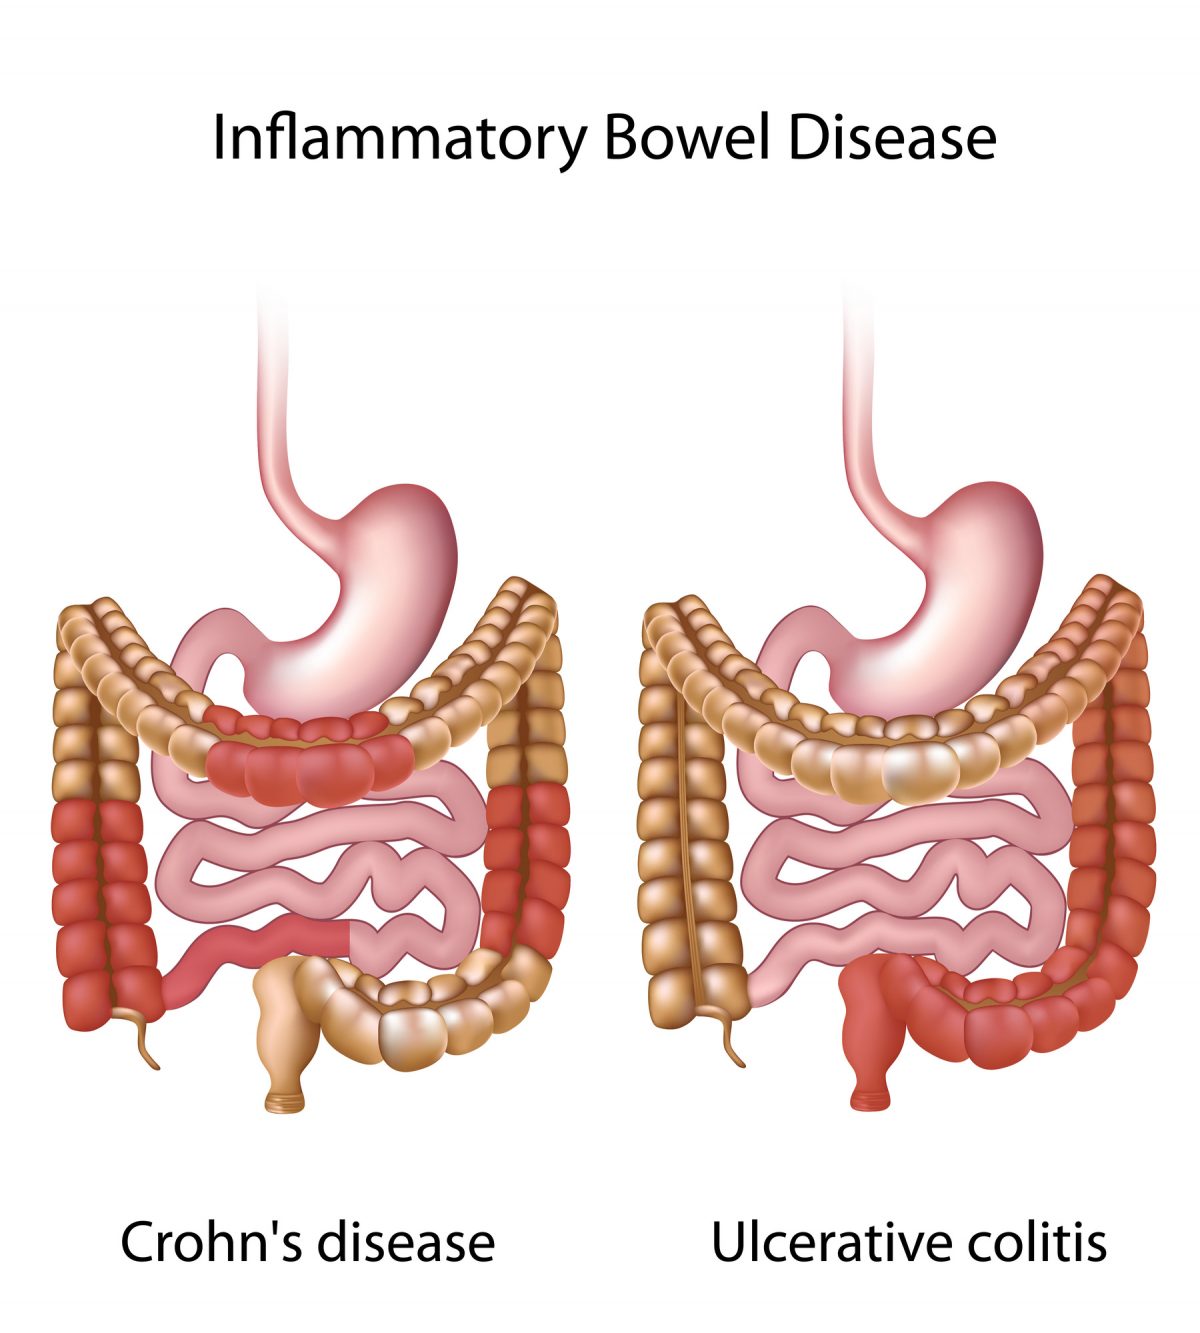 When Can Crohn’s Disease Require Colon and Rectal Surgery